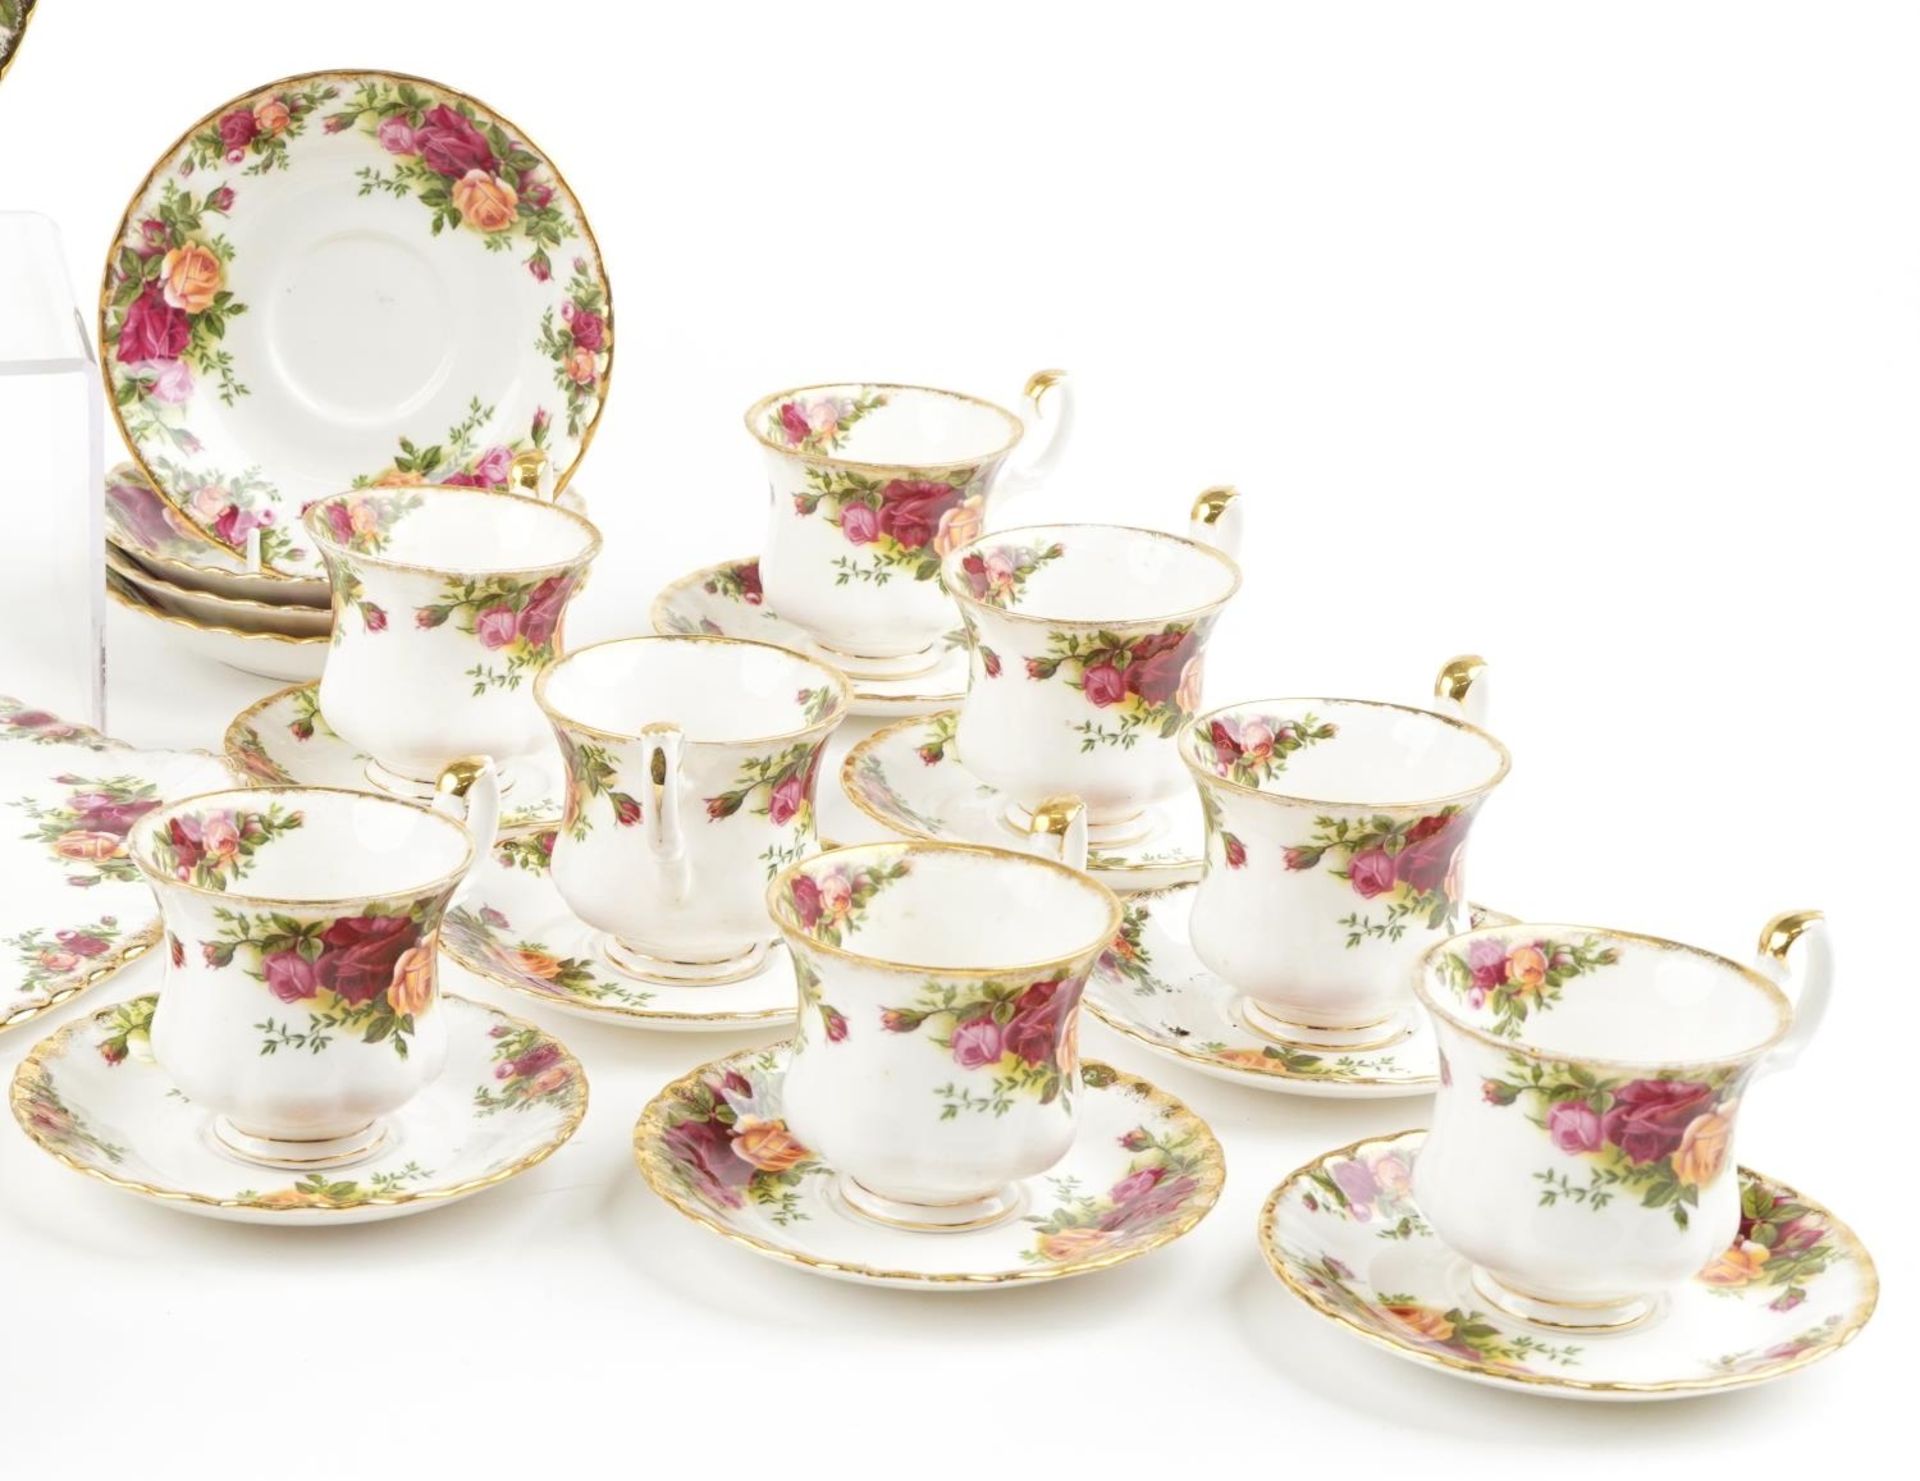 Royal Albert Old Country Roses china including various teaware, wall clock and cake tray, 35cm - Bild 4 aus 5